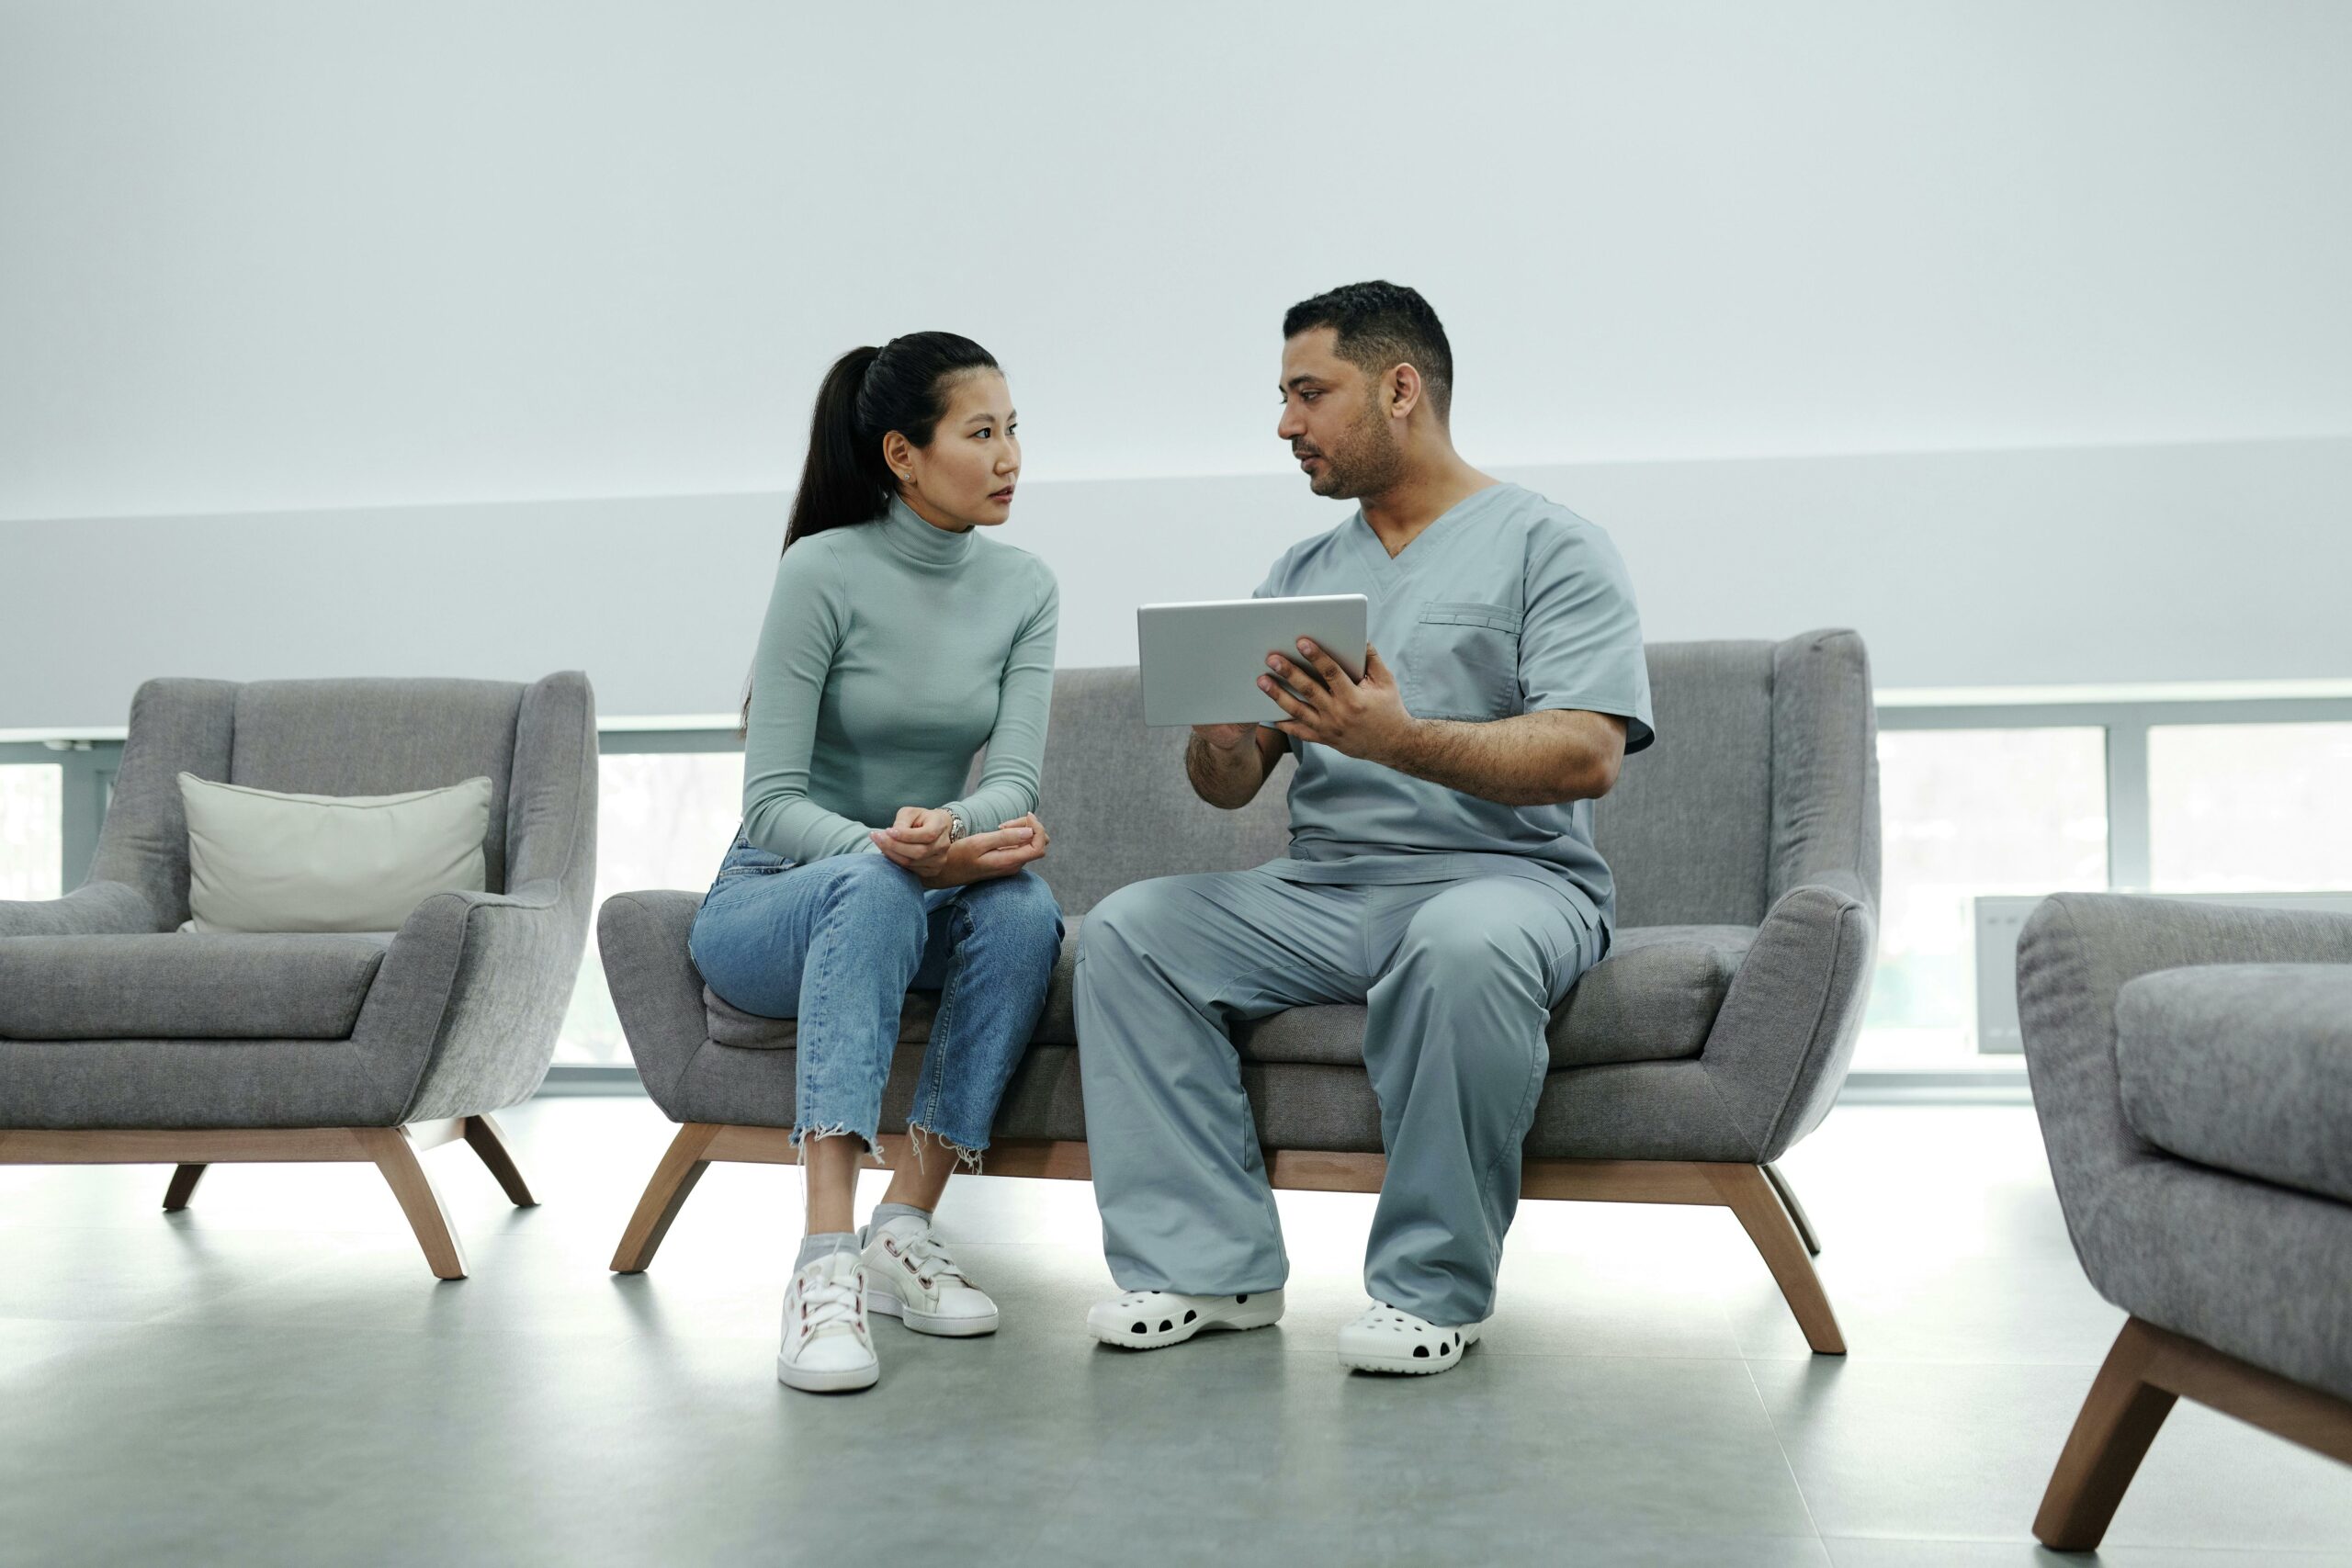 nurse in gray scrubs speaking with a patient on a couch